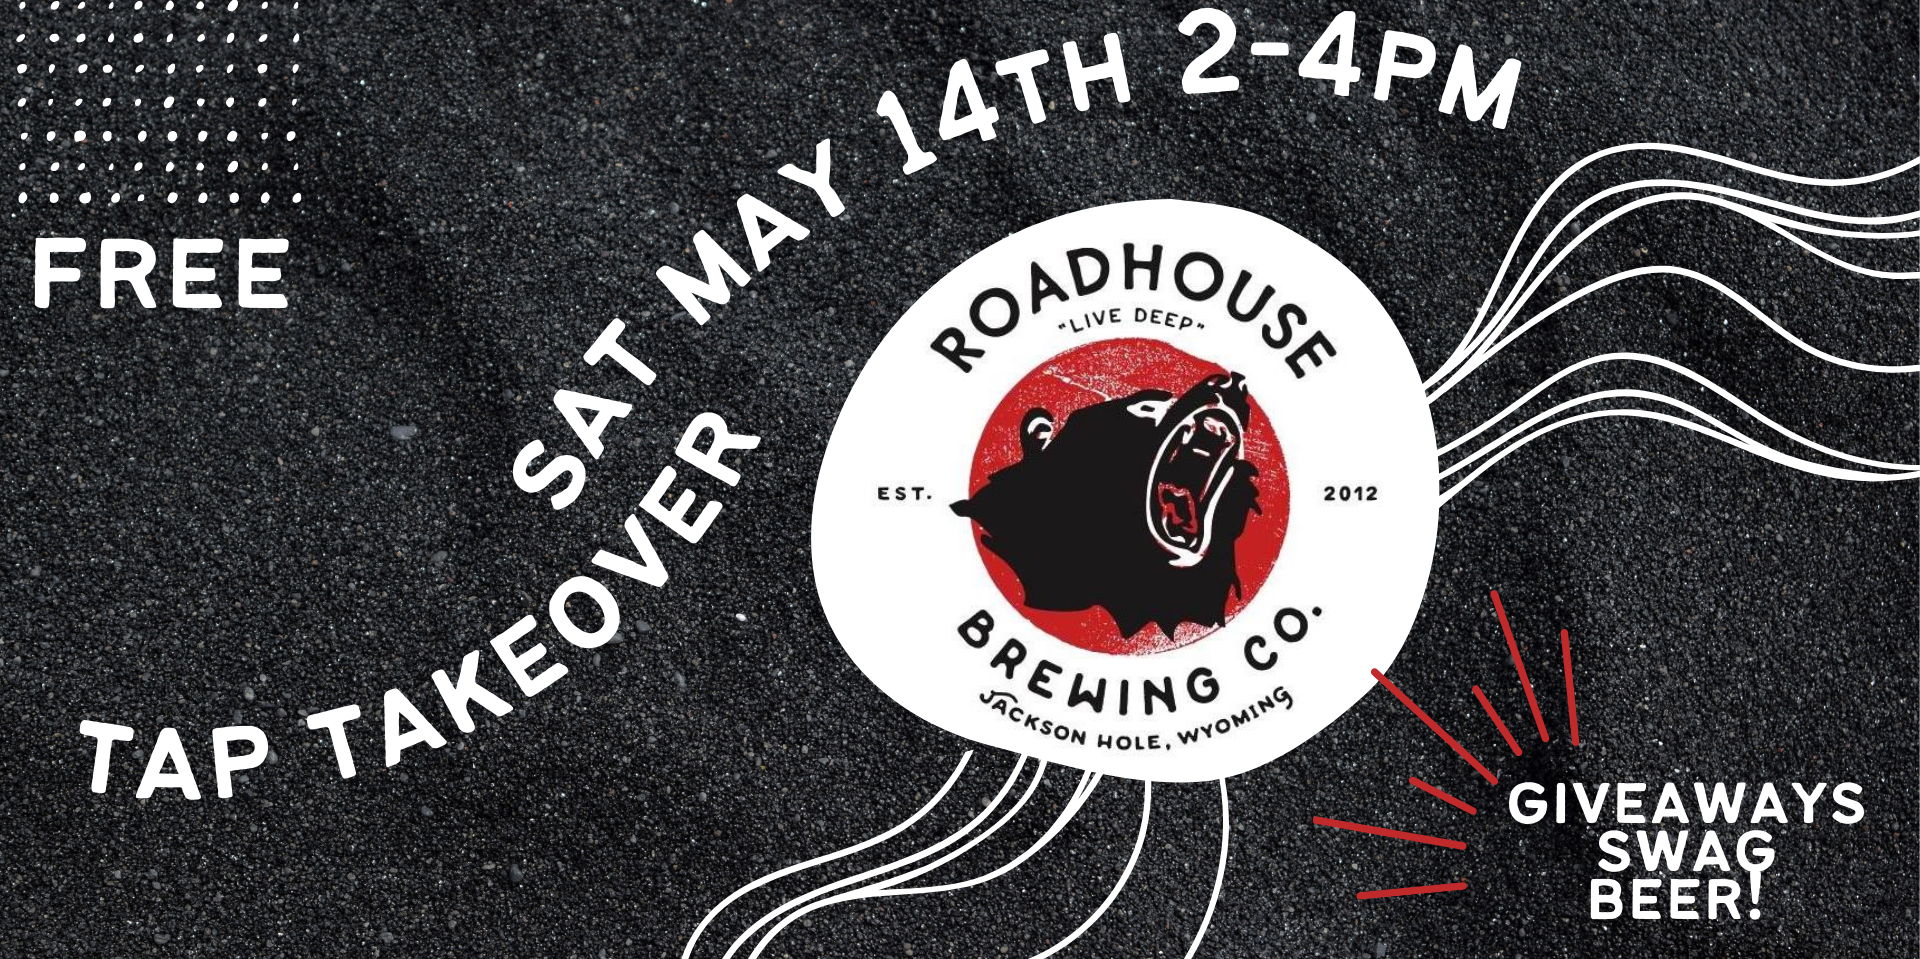 Roadhouse Brewing Tap Takeover promotional image